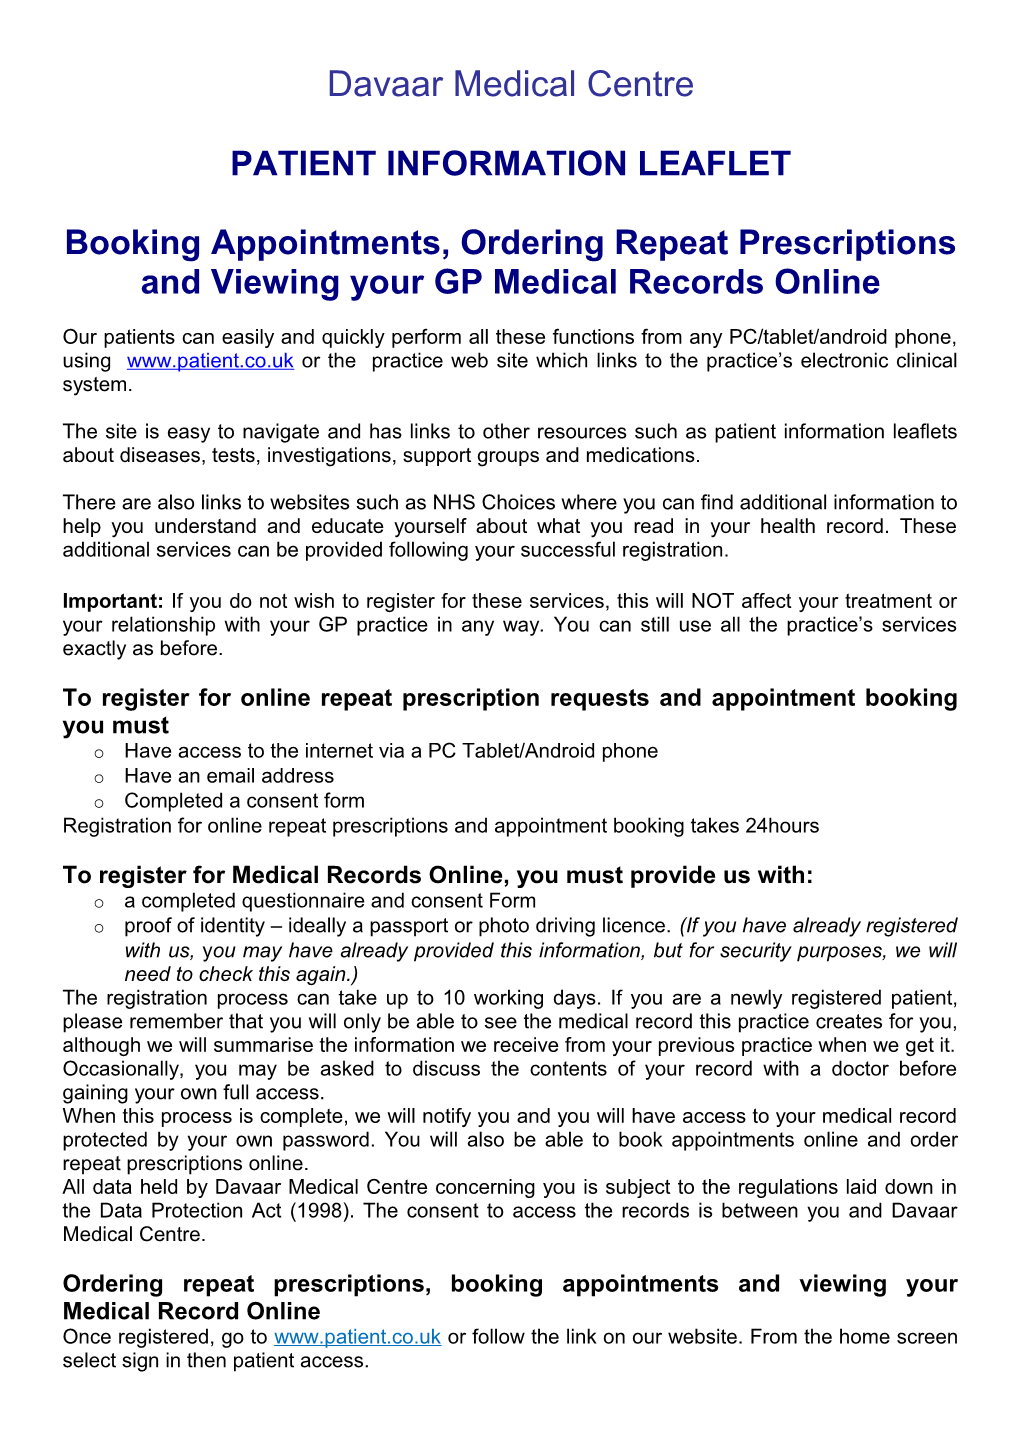 Booking Appointments, Ordering Repeat Prescriptions and Viewing Your GP Medical Records Online